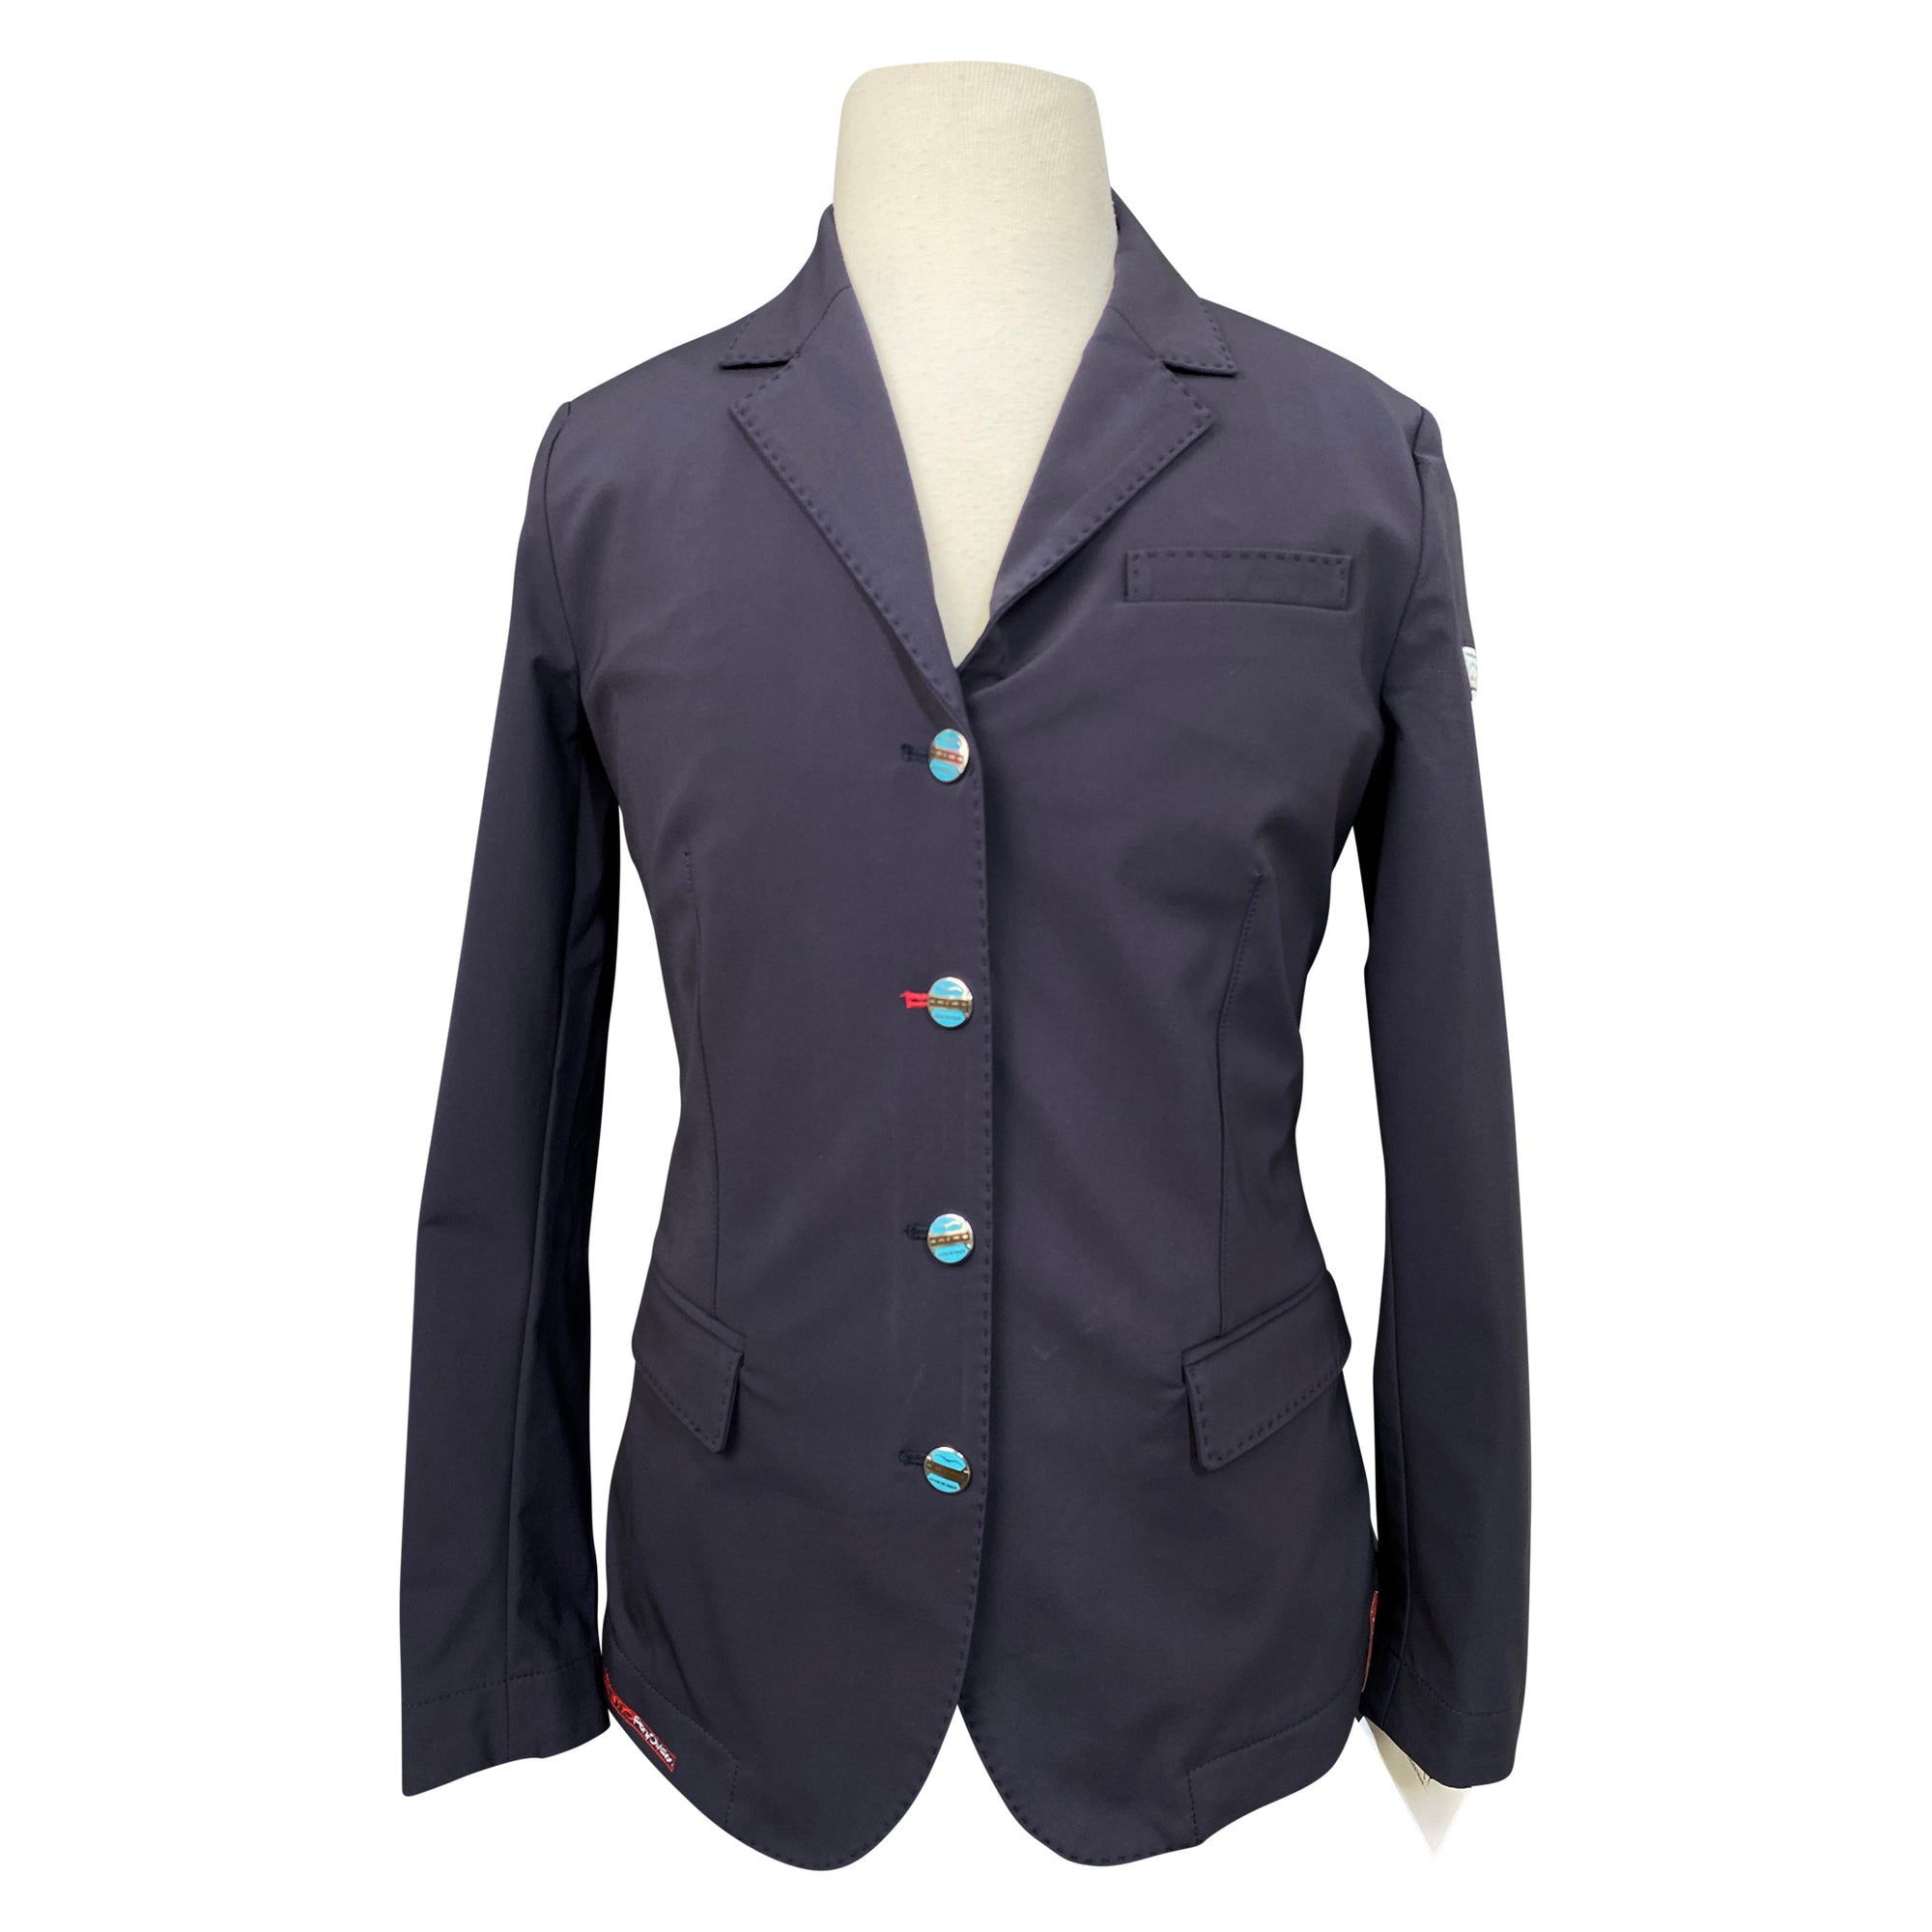 Animo 'Pony Division' Show Coat in Deep Navy